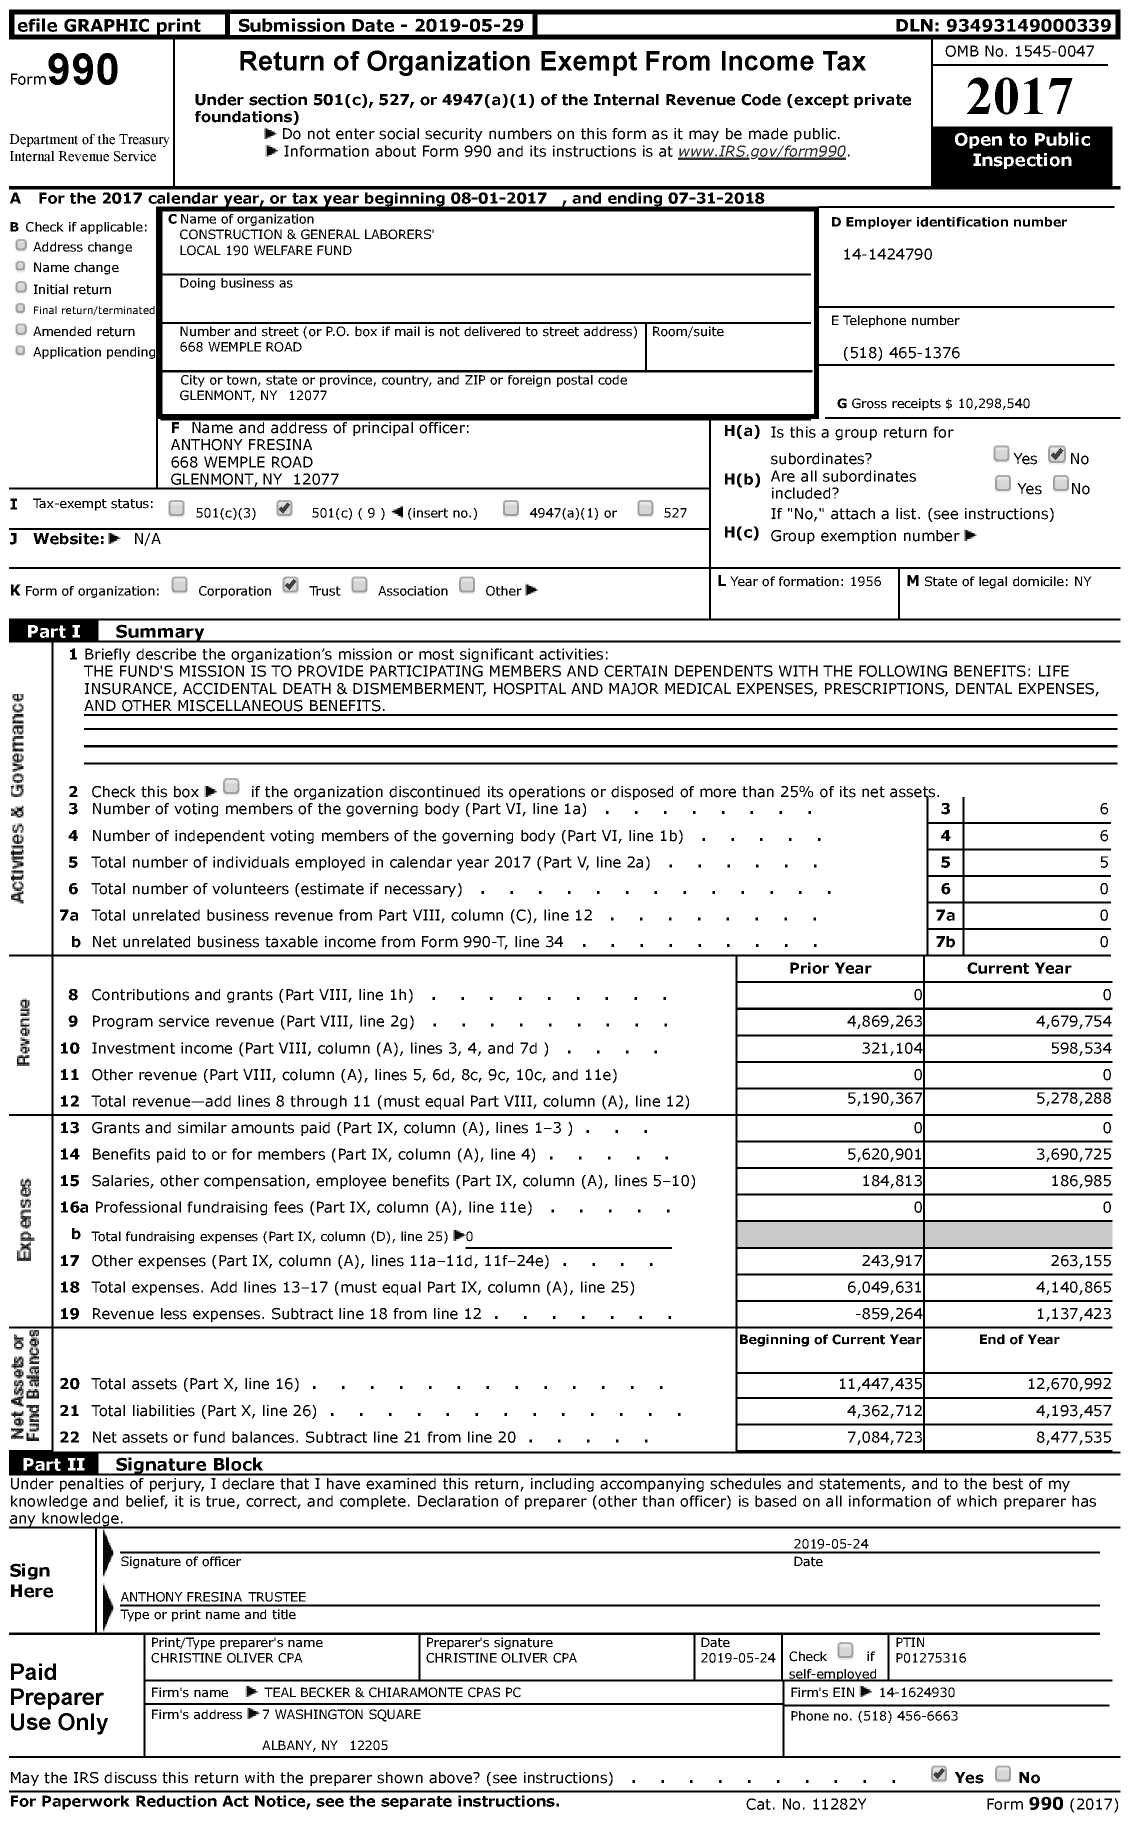 Image of first page of 2017 Form 990 for Construction and General Laborers' Local 190 Welfare Fund